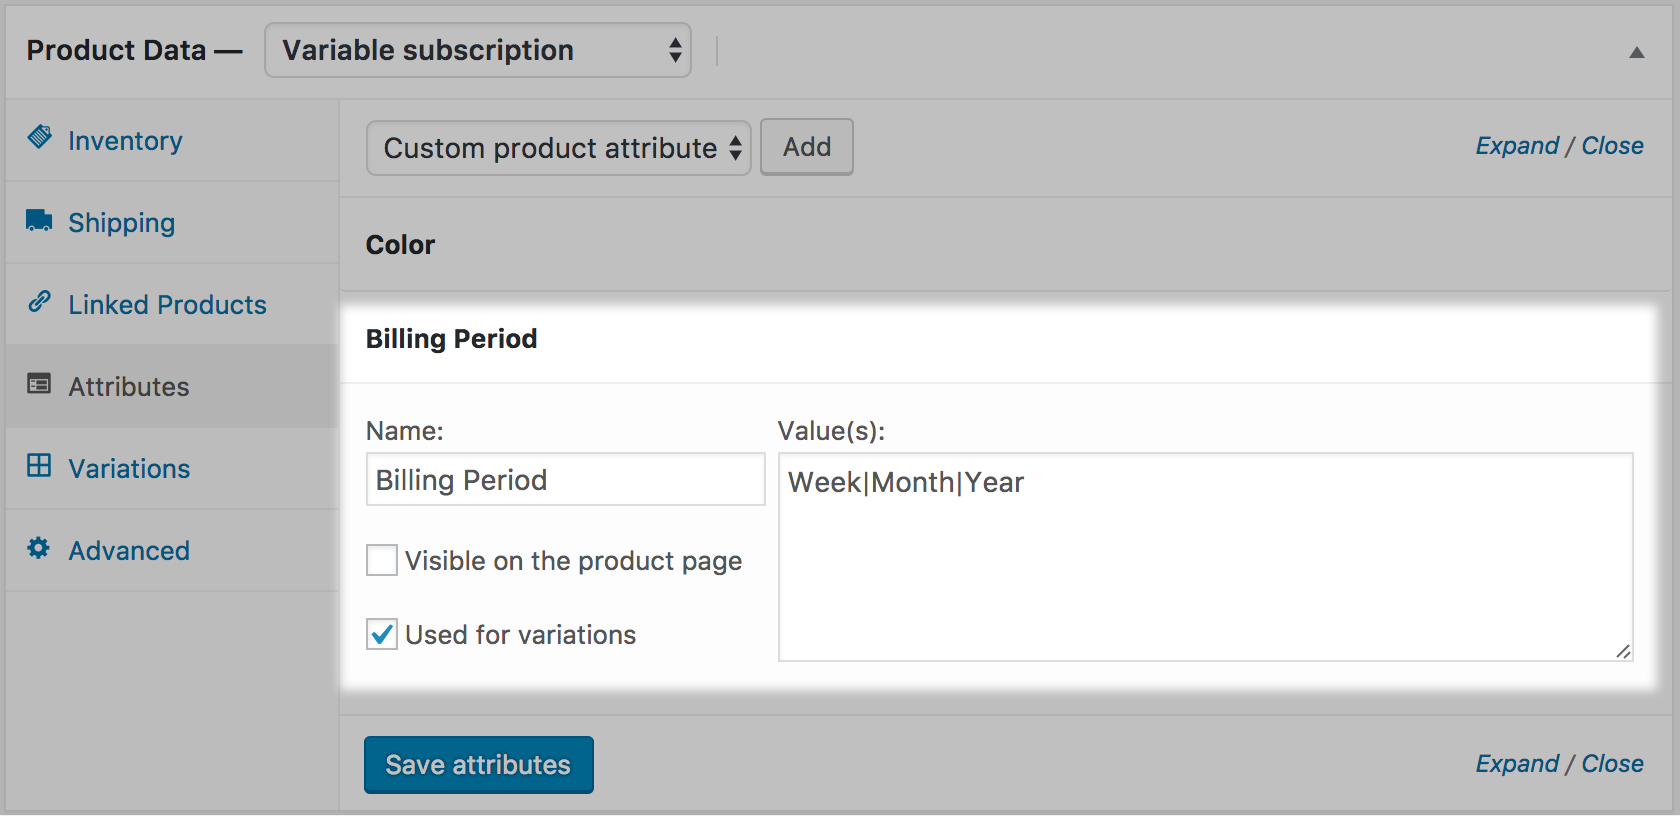 A "Billing Period" Attribute with Week/Month/Year Values